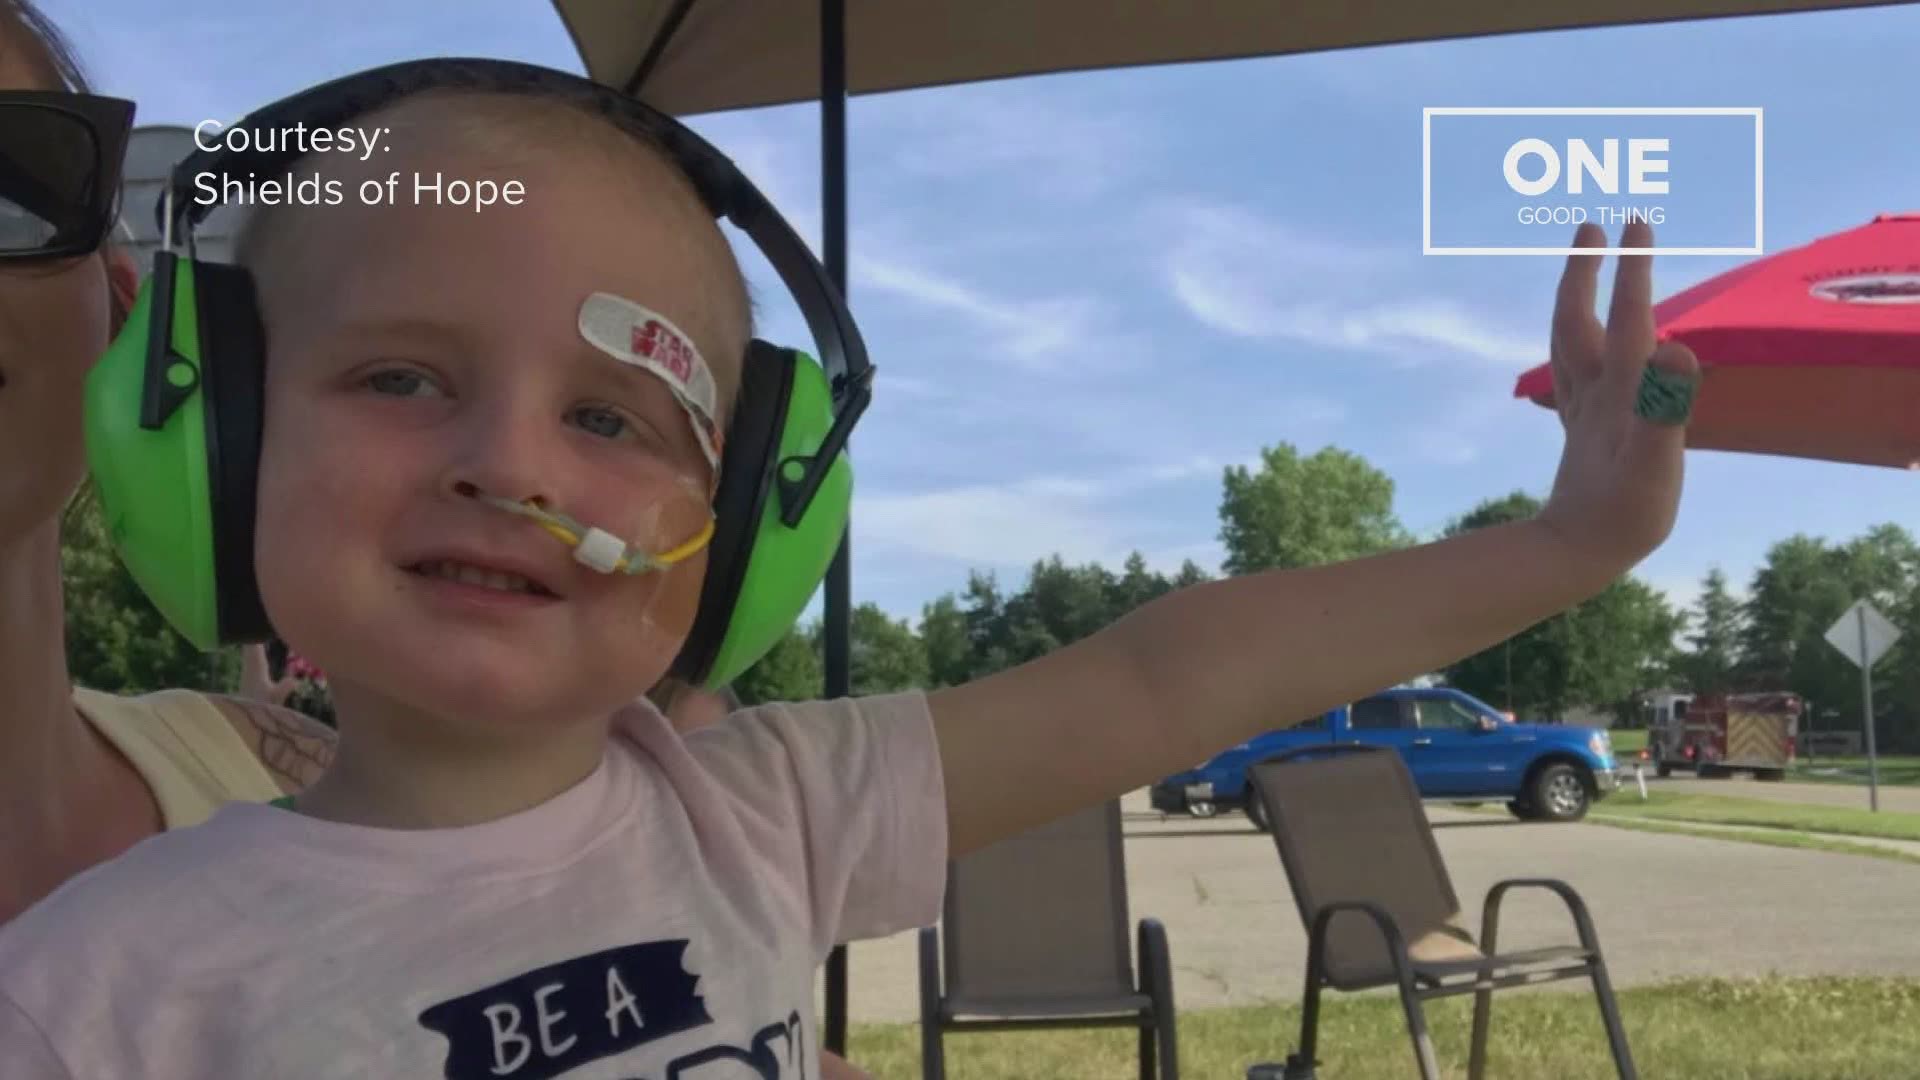 Silas was a beautiful three-year-old boy who bravely fought a rare Leukemia. He passed away a few days ago, but before that, he got the parade of a lifetime.